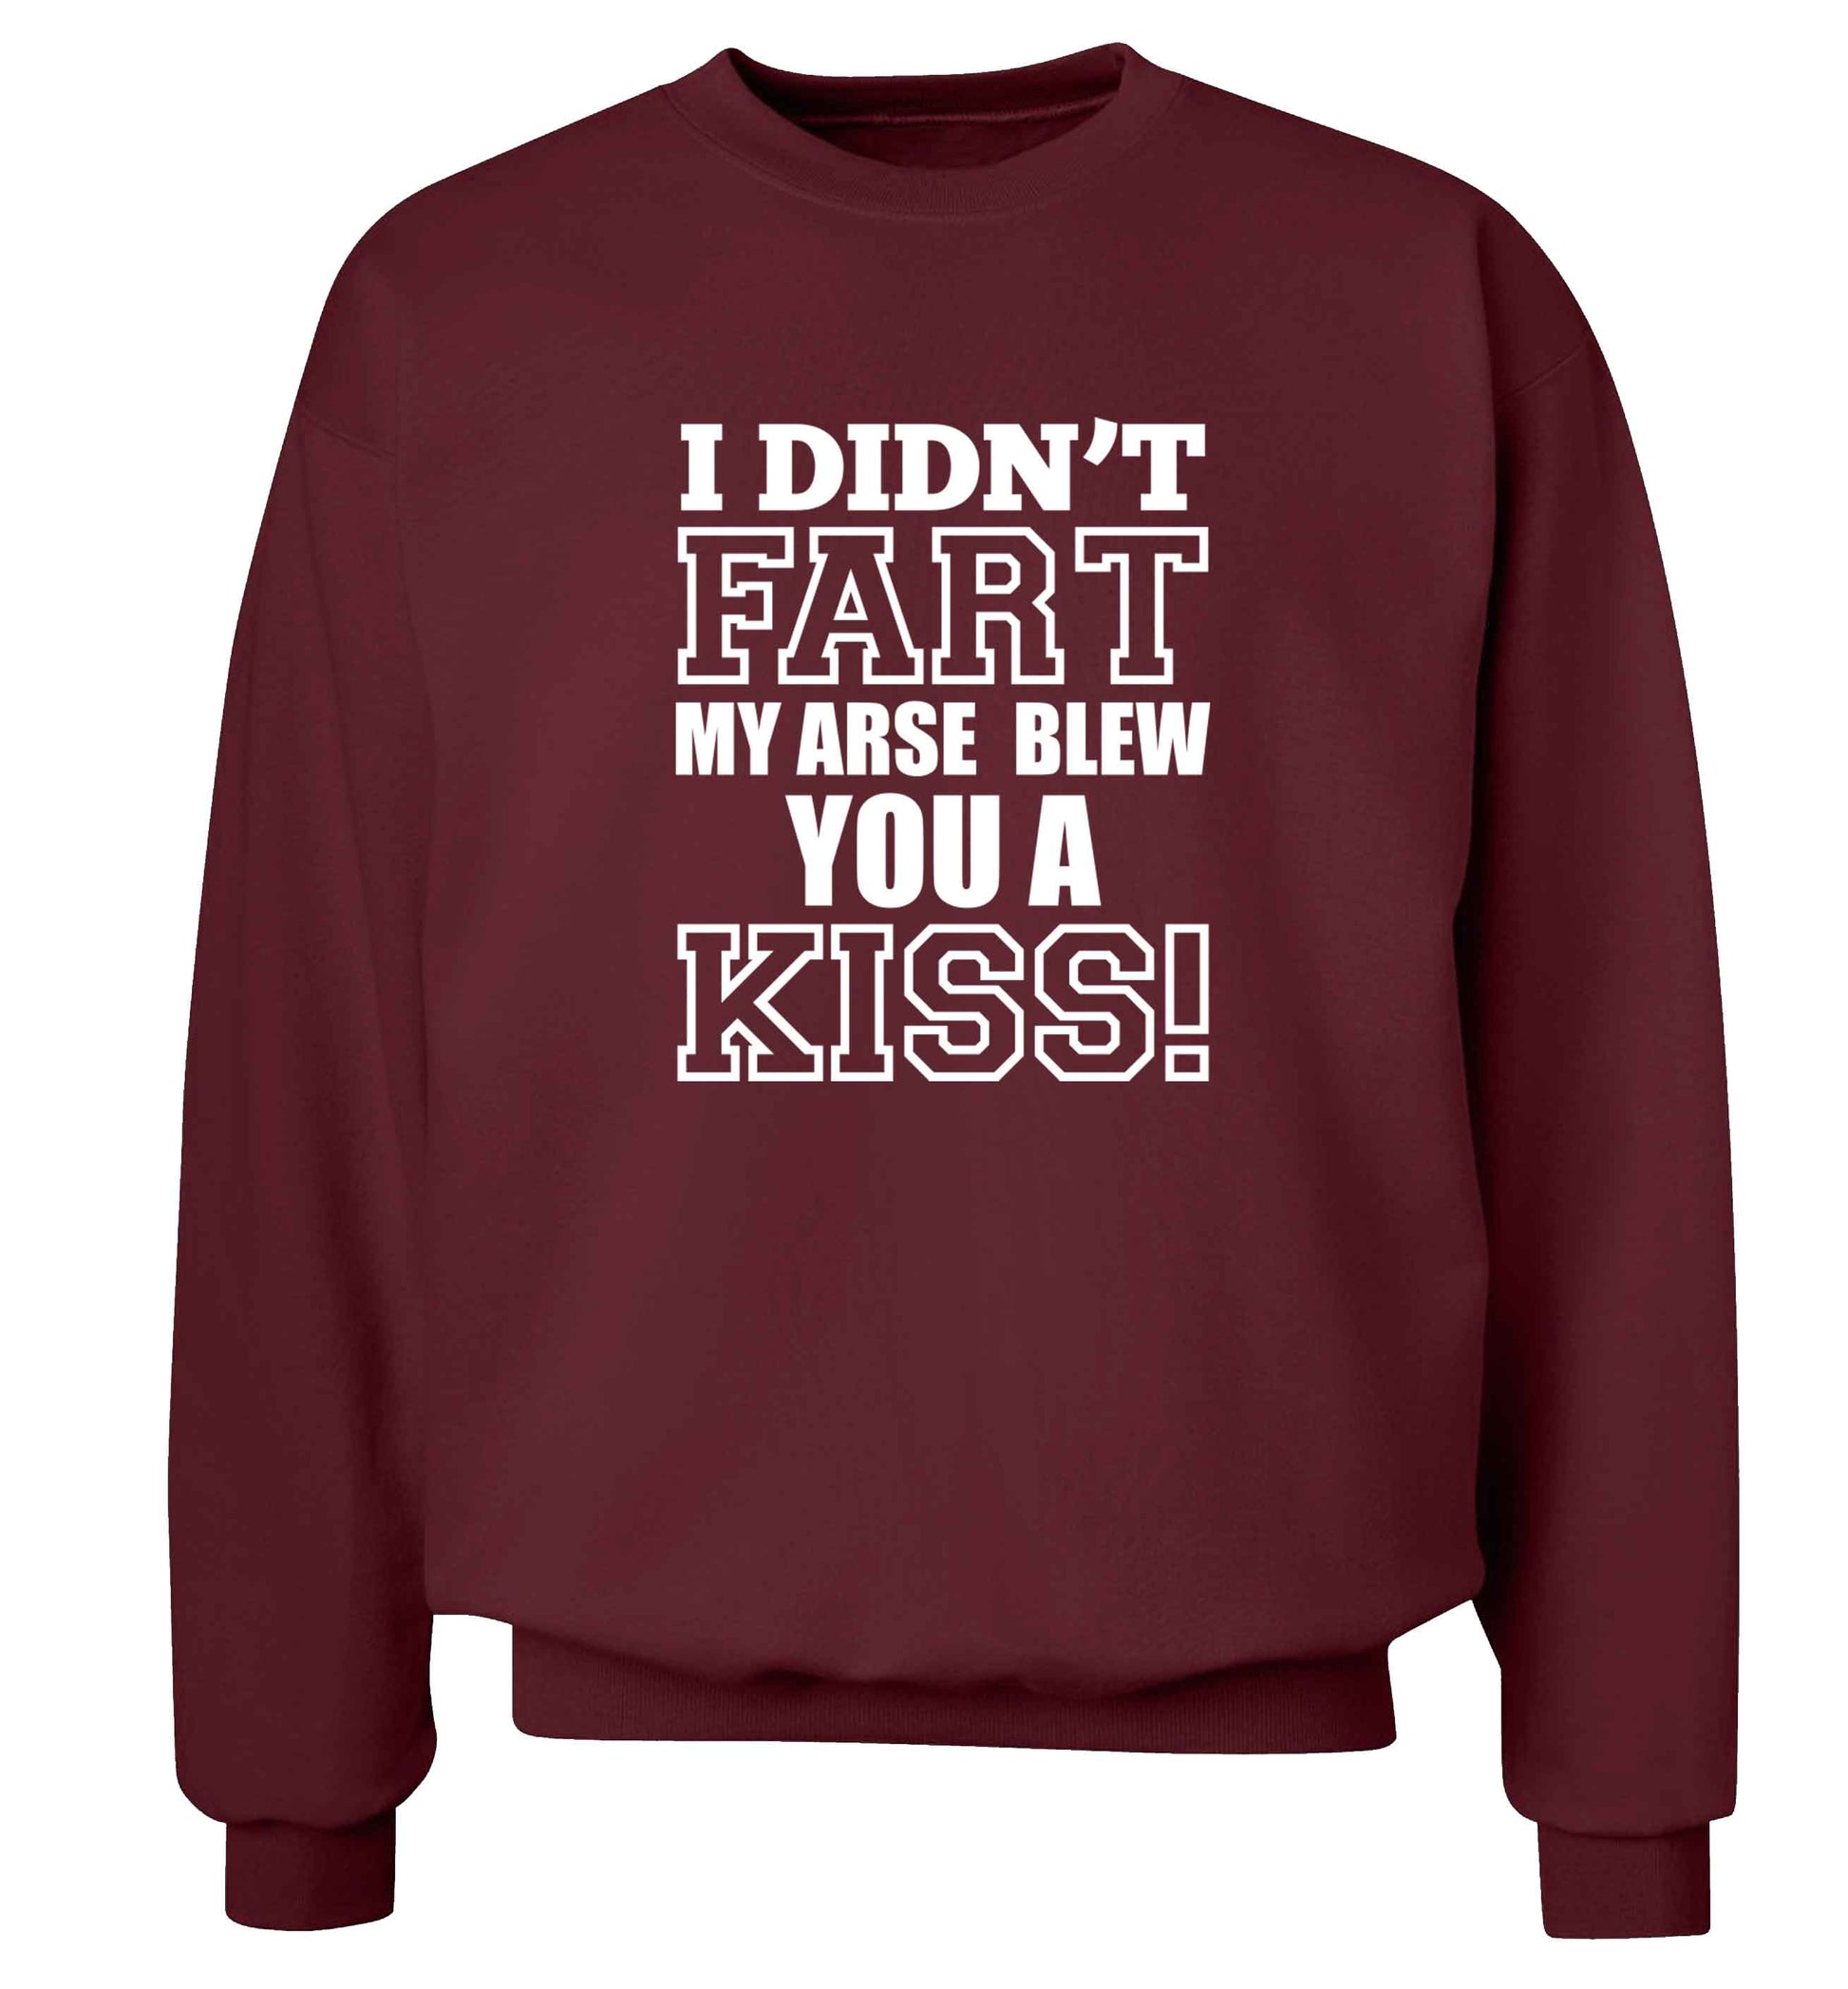 I didn't fart my arse blew you a kiss adult's unisex maroon sweater 2XL